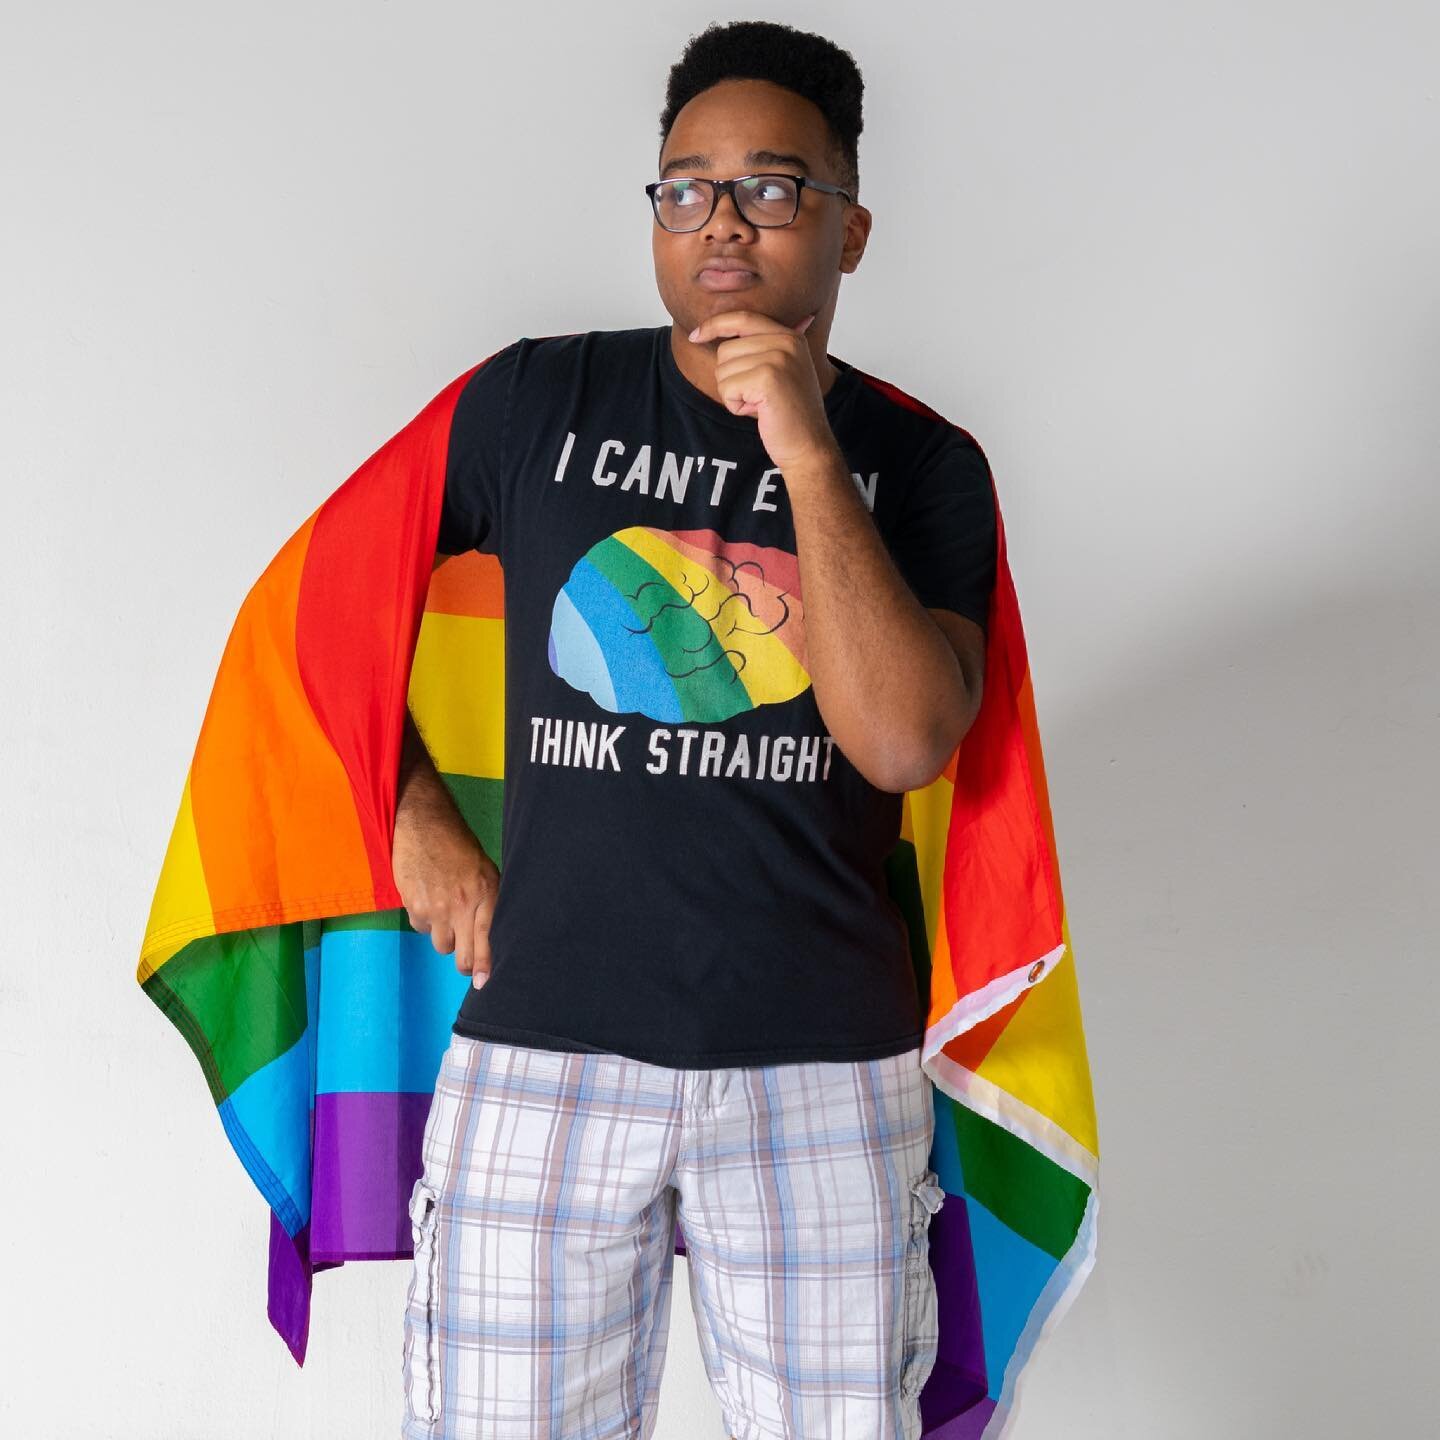 Shout out to @gayninja99 for being such an amazing and energetic model at my Pride Photoshoot! #pride #pride🌈 #pride2021 #lgbtq🌈 #lgbt #pridemonth #portraitphotography #portrait